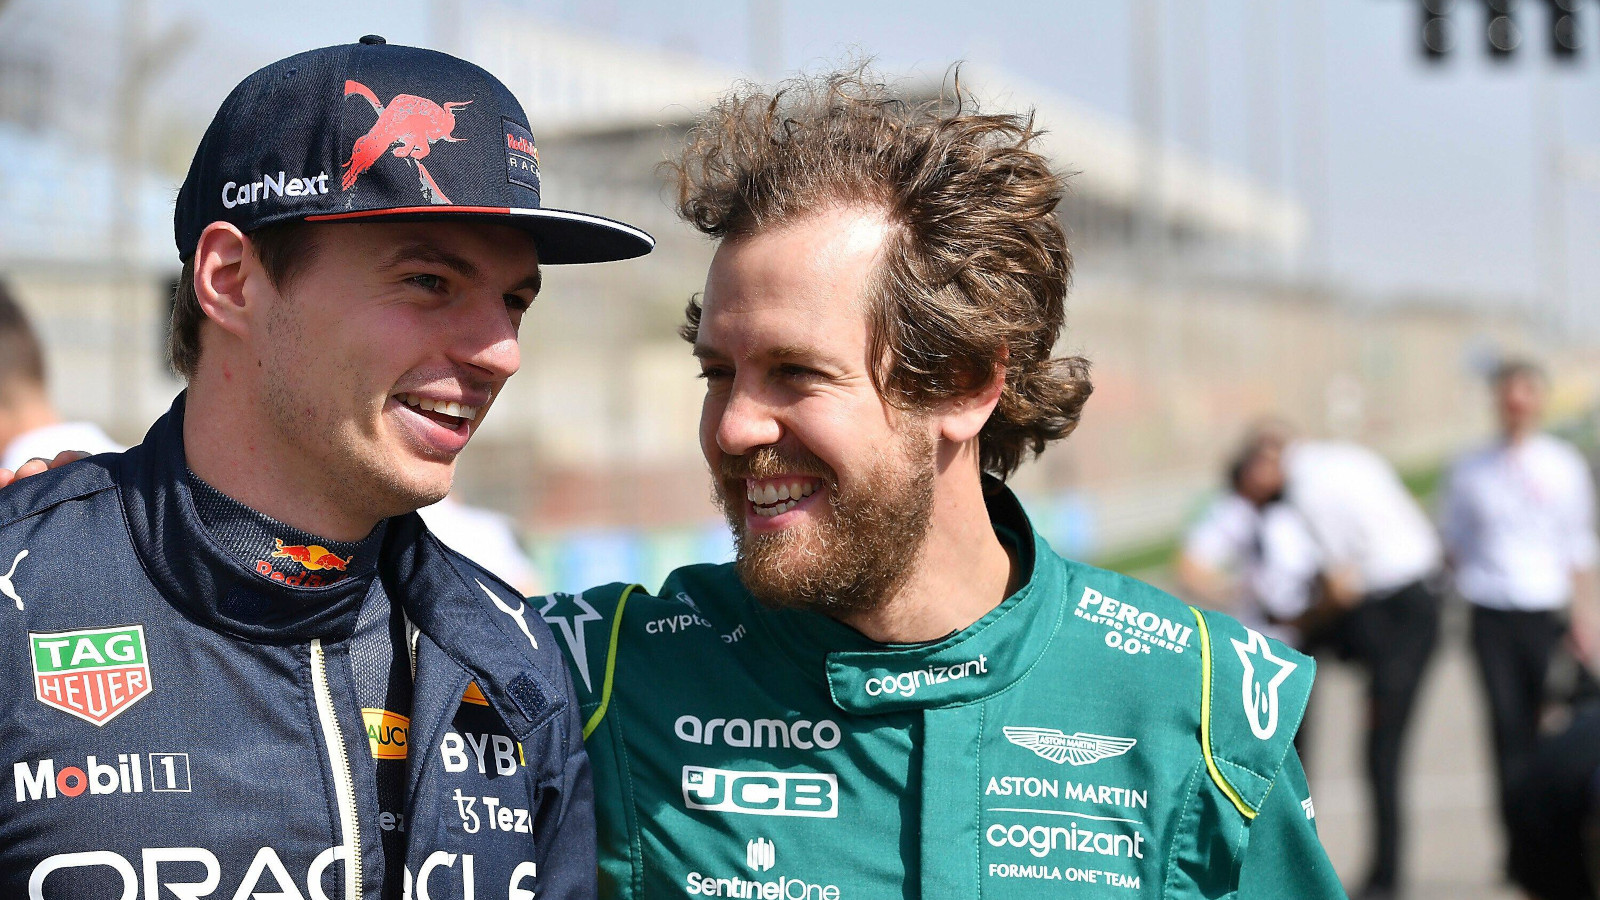 Sebastian Vettel with his arm around Max Verstappen in the pre 2022 group grid event.